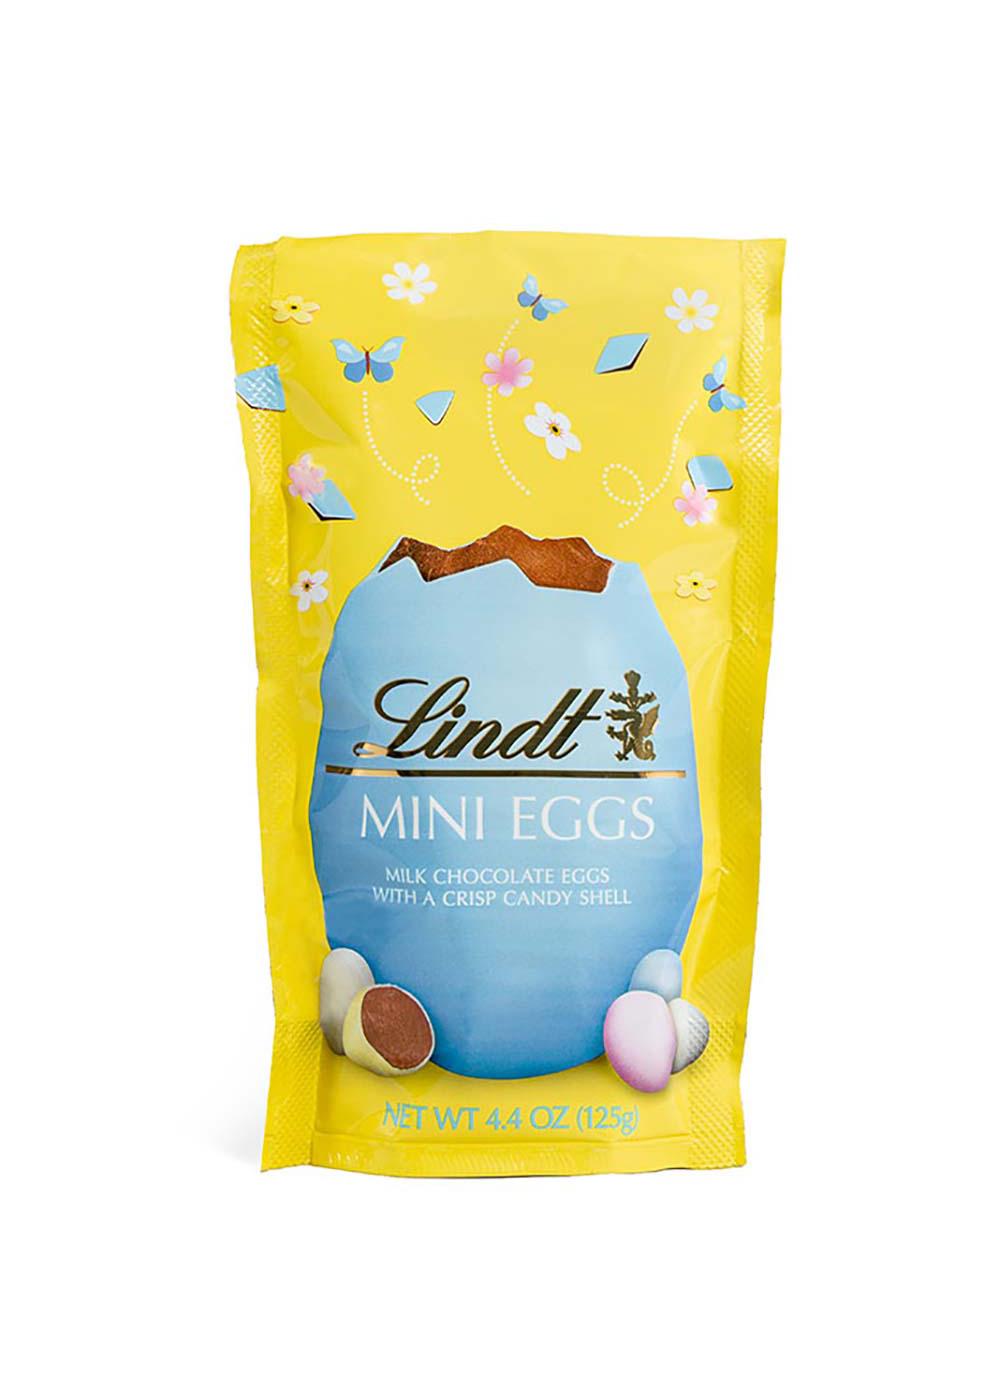 Lindt Mini Eggs Easter Candy; image 1 of 2